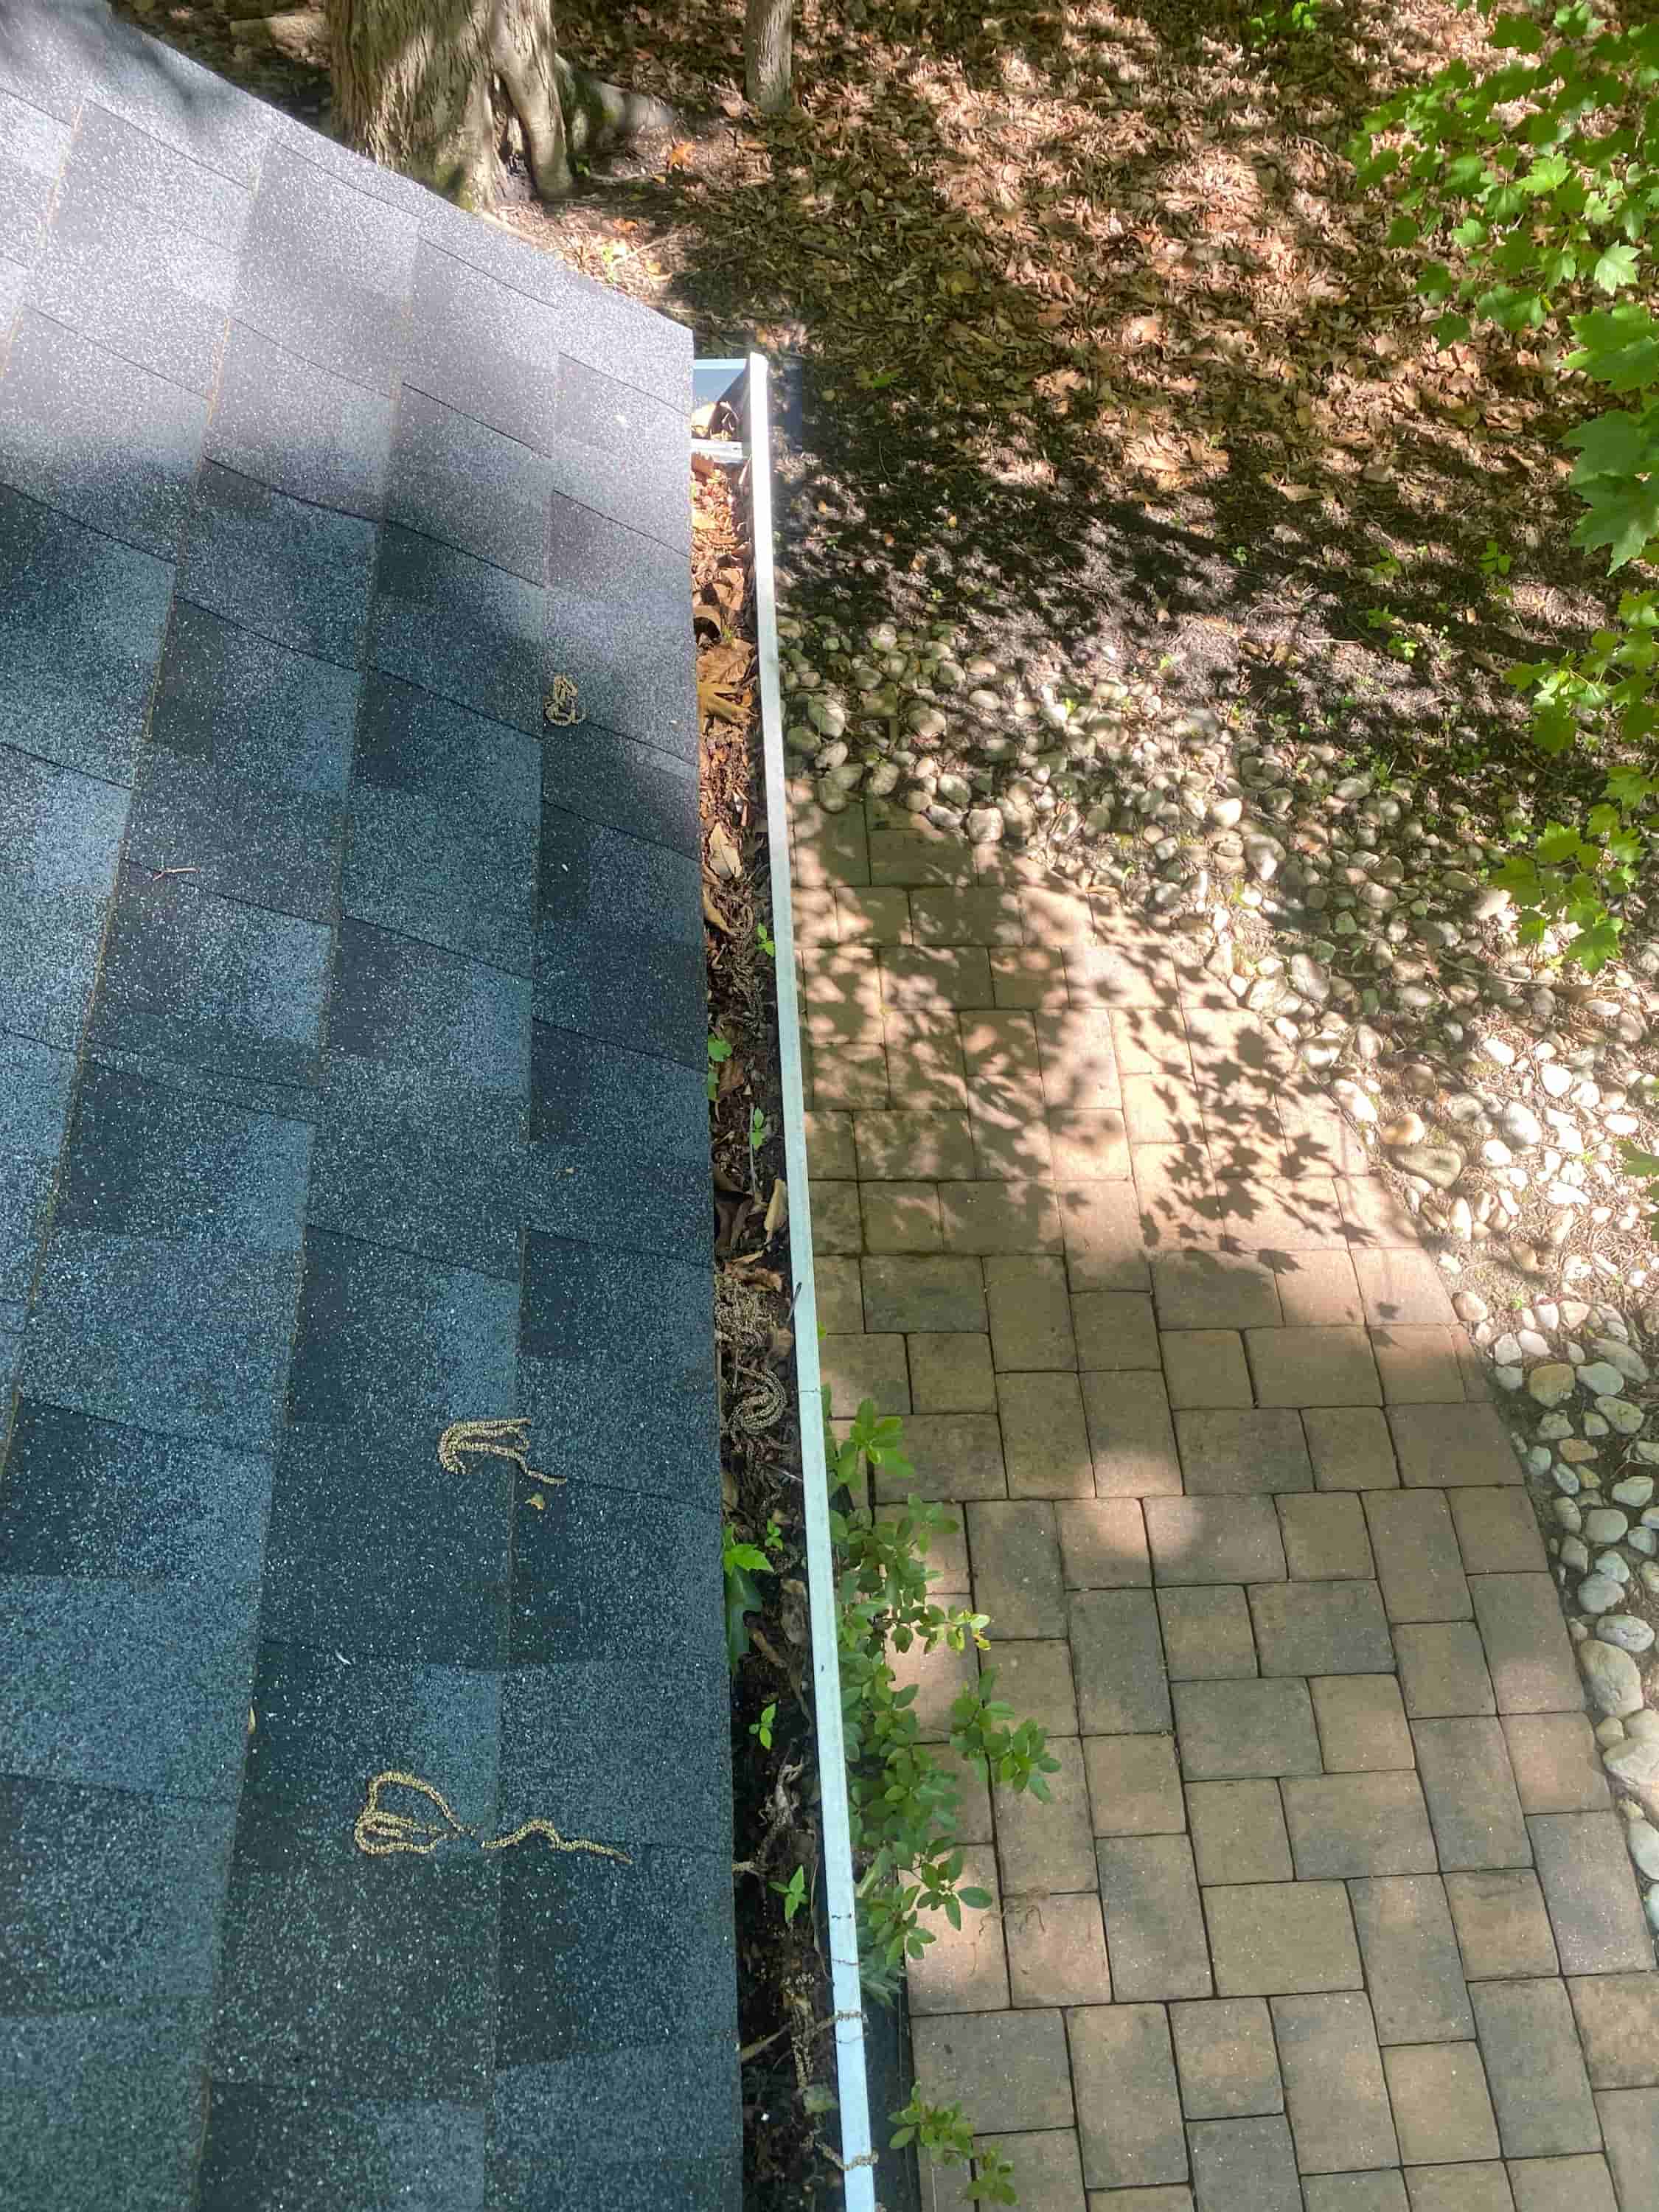 gutter cleaner in my area